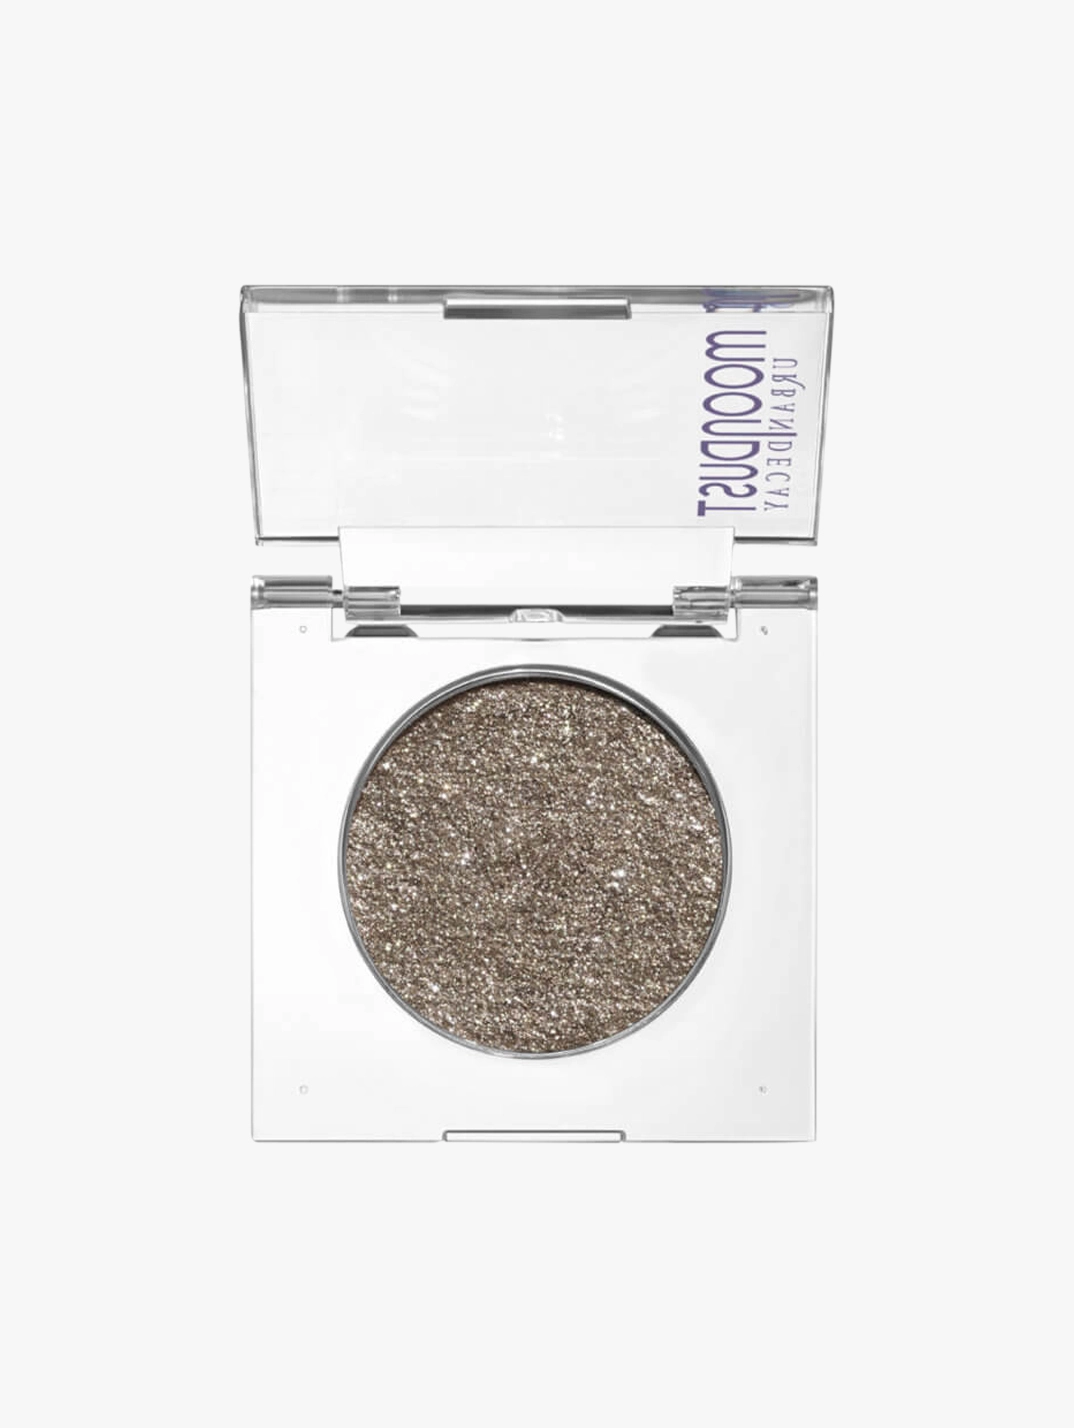 URBAN DECAY 24/7 Moondust Eyeshadow Compact - Long-Lasting Shimmery Eye  Makeup and Highlight - Up to 16 Hour Wear - Vegan Formula